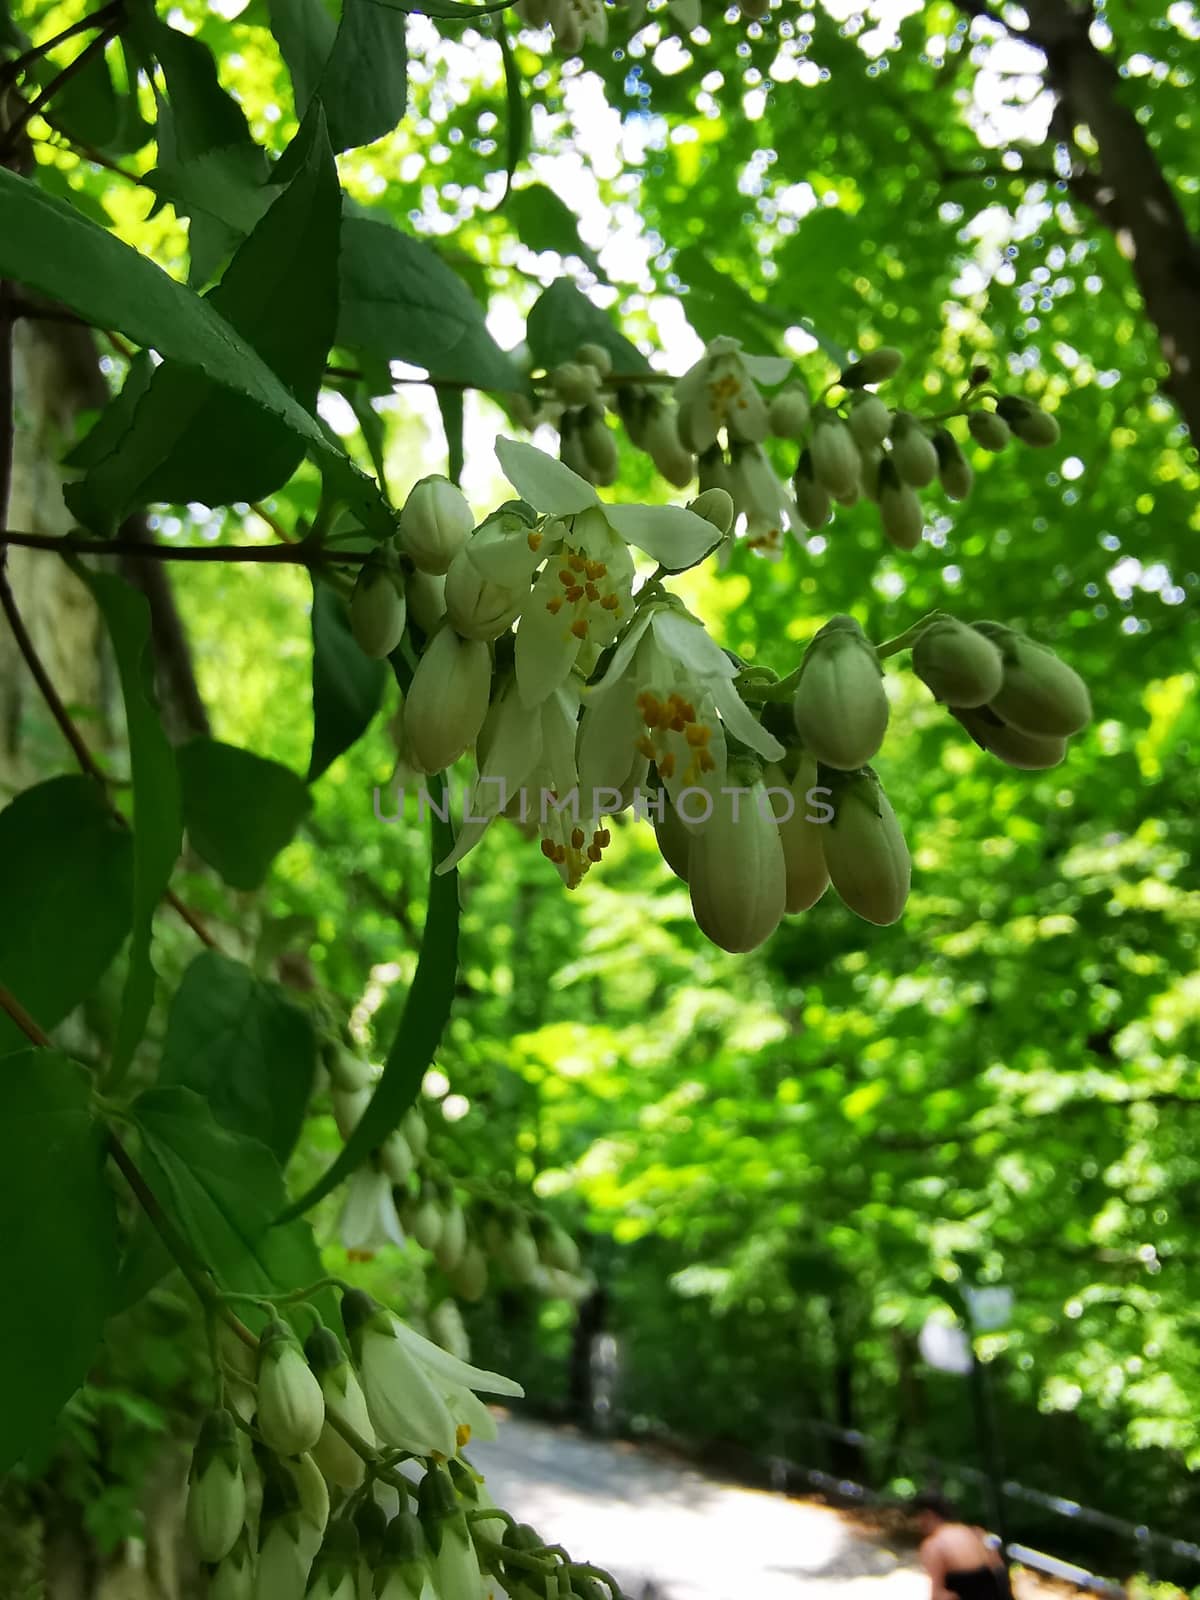 A fruit hanging from a tree. High quality photo